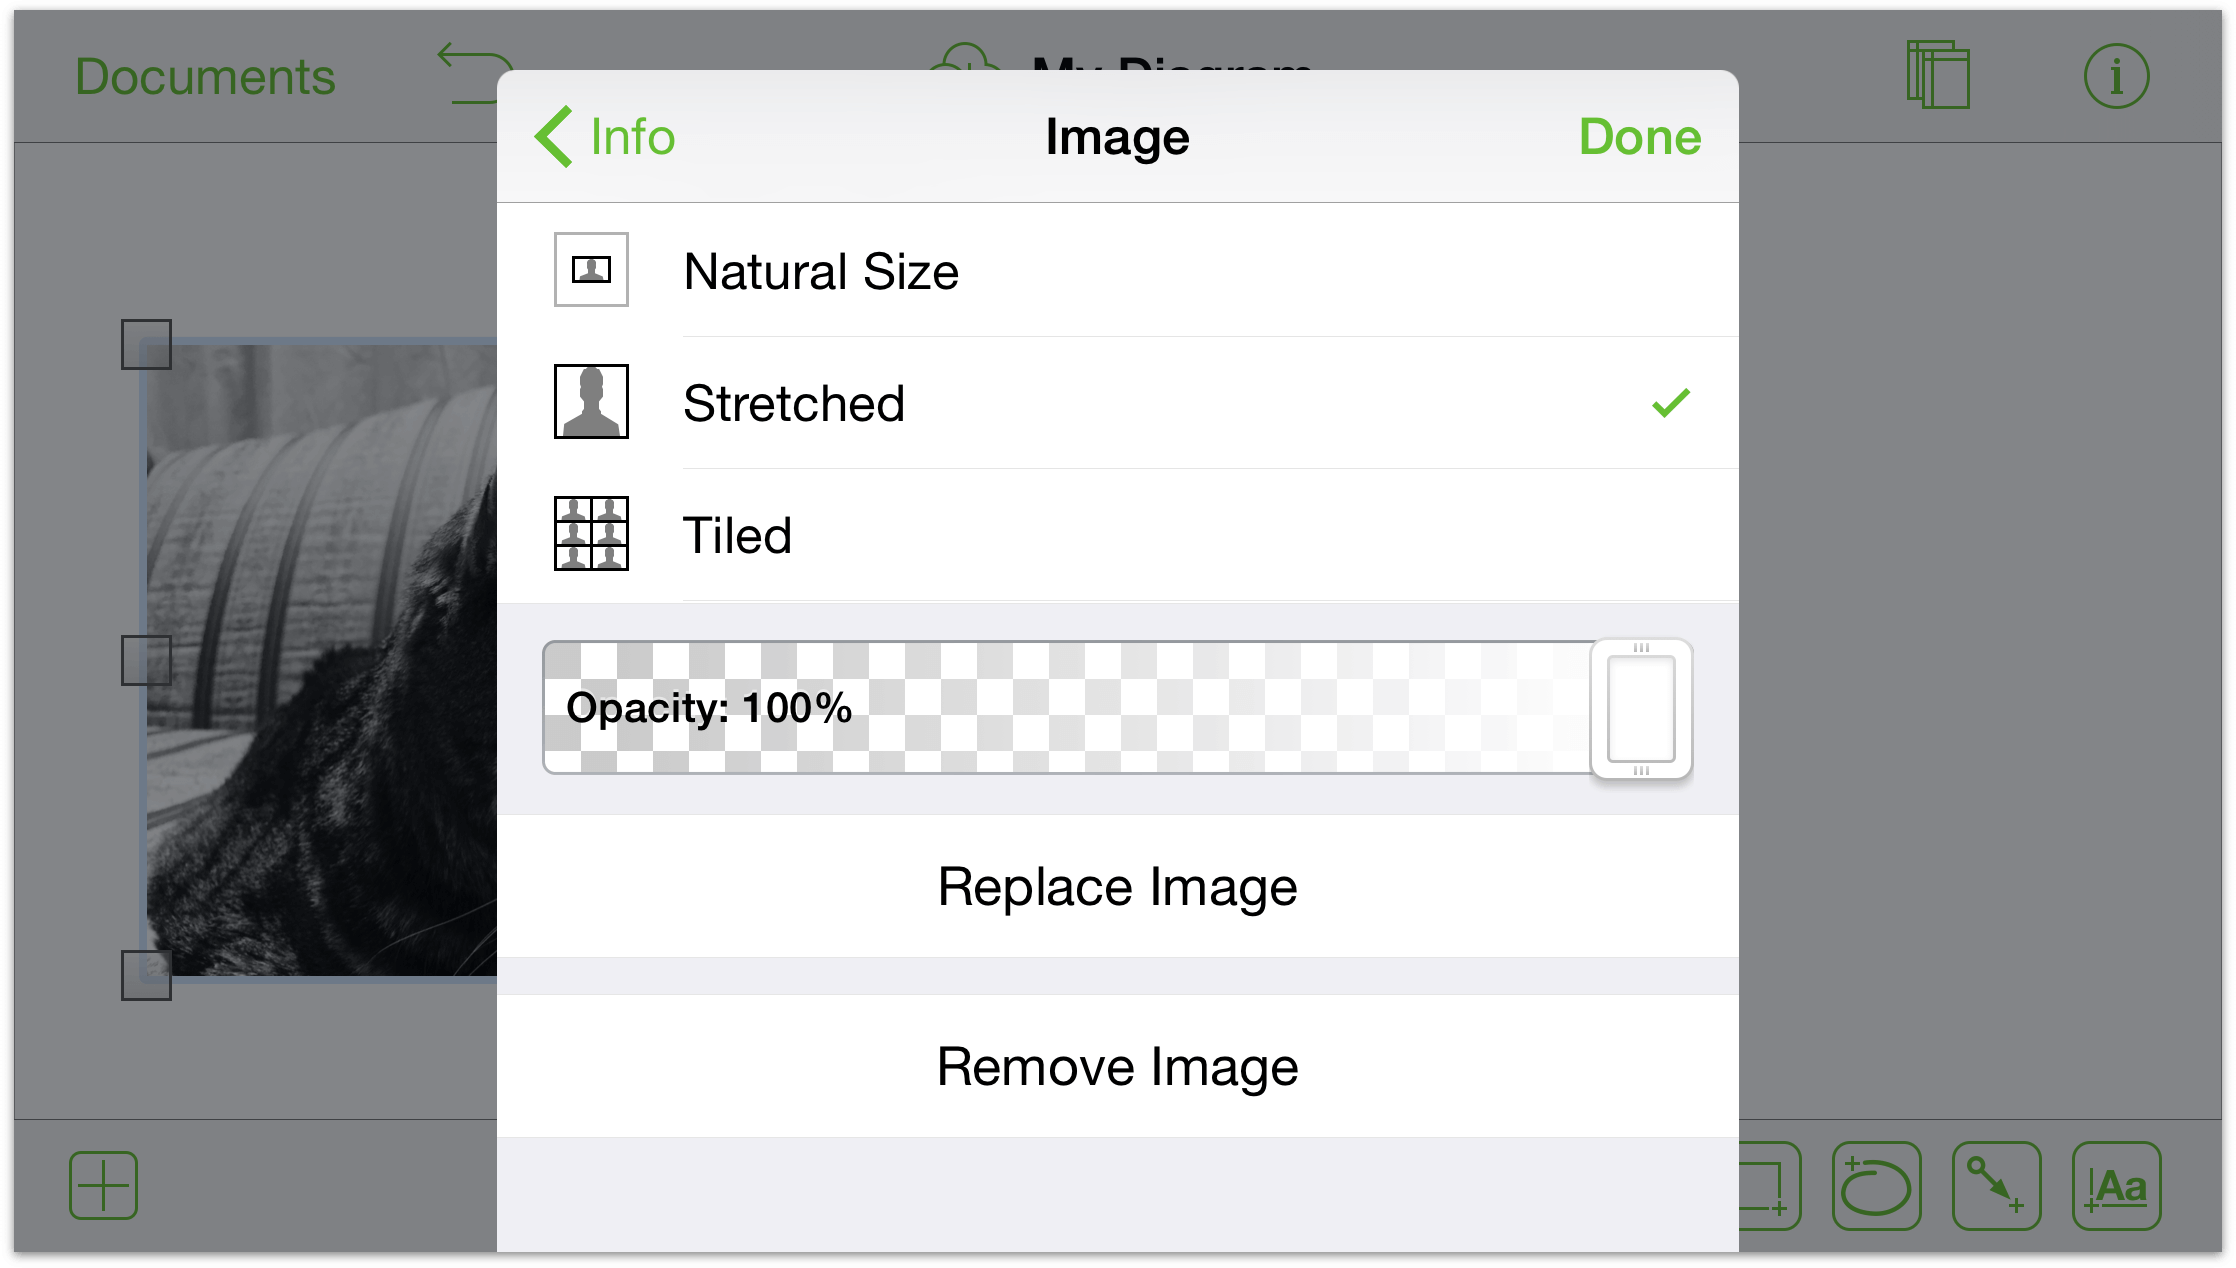 The Image inspector